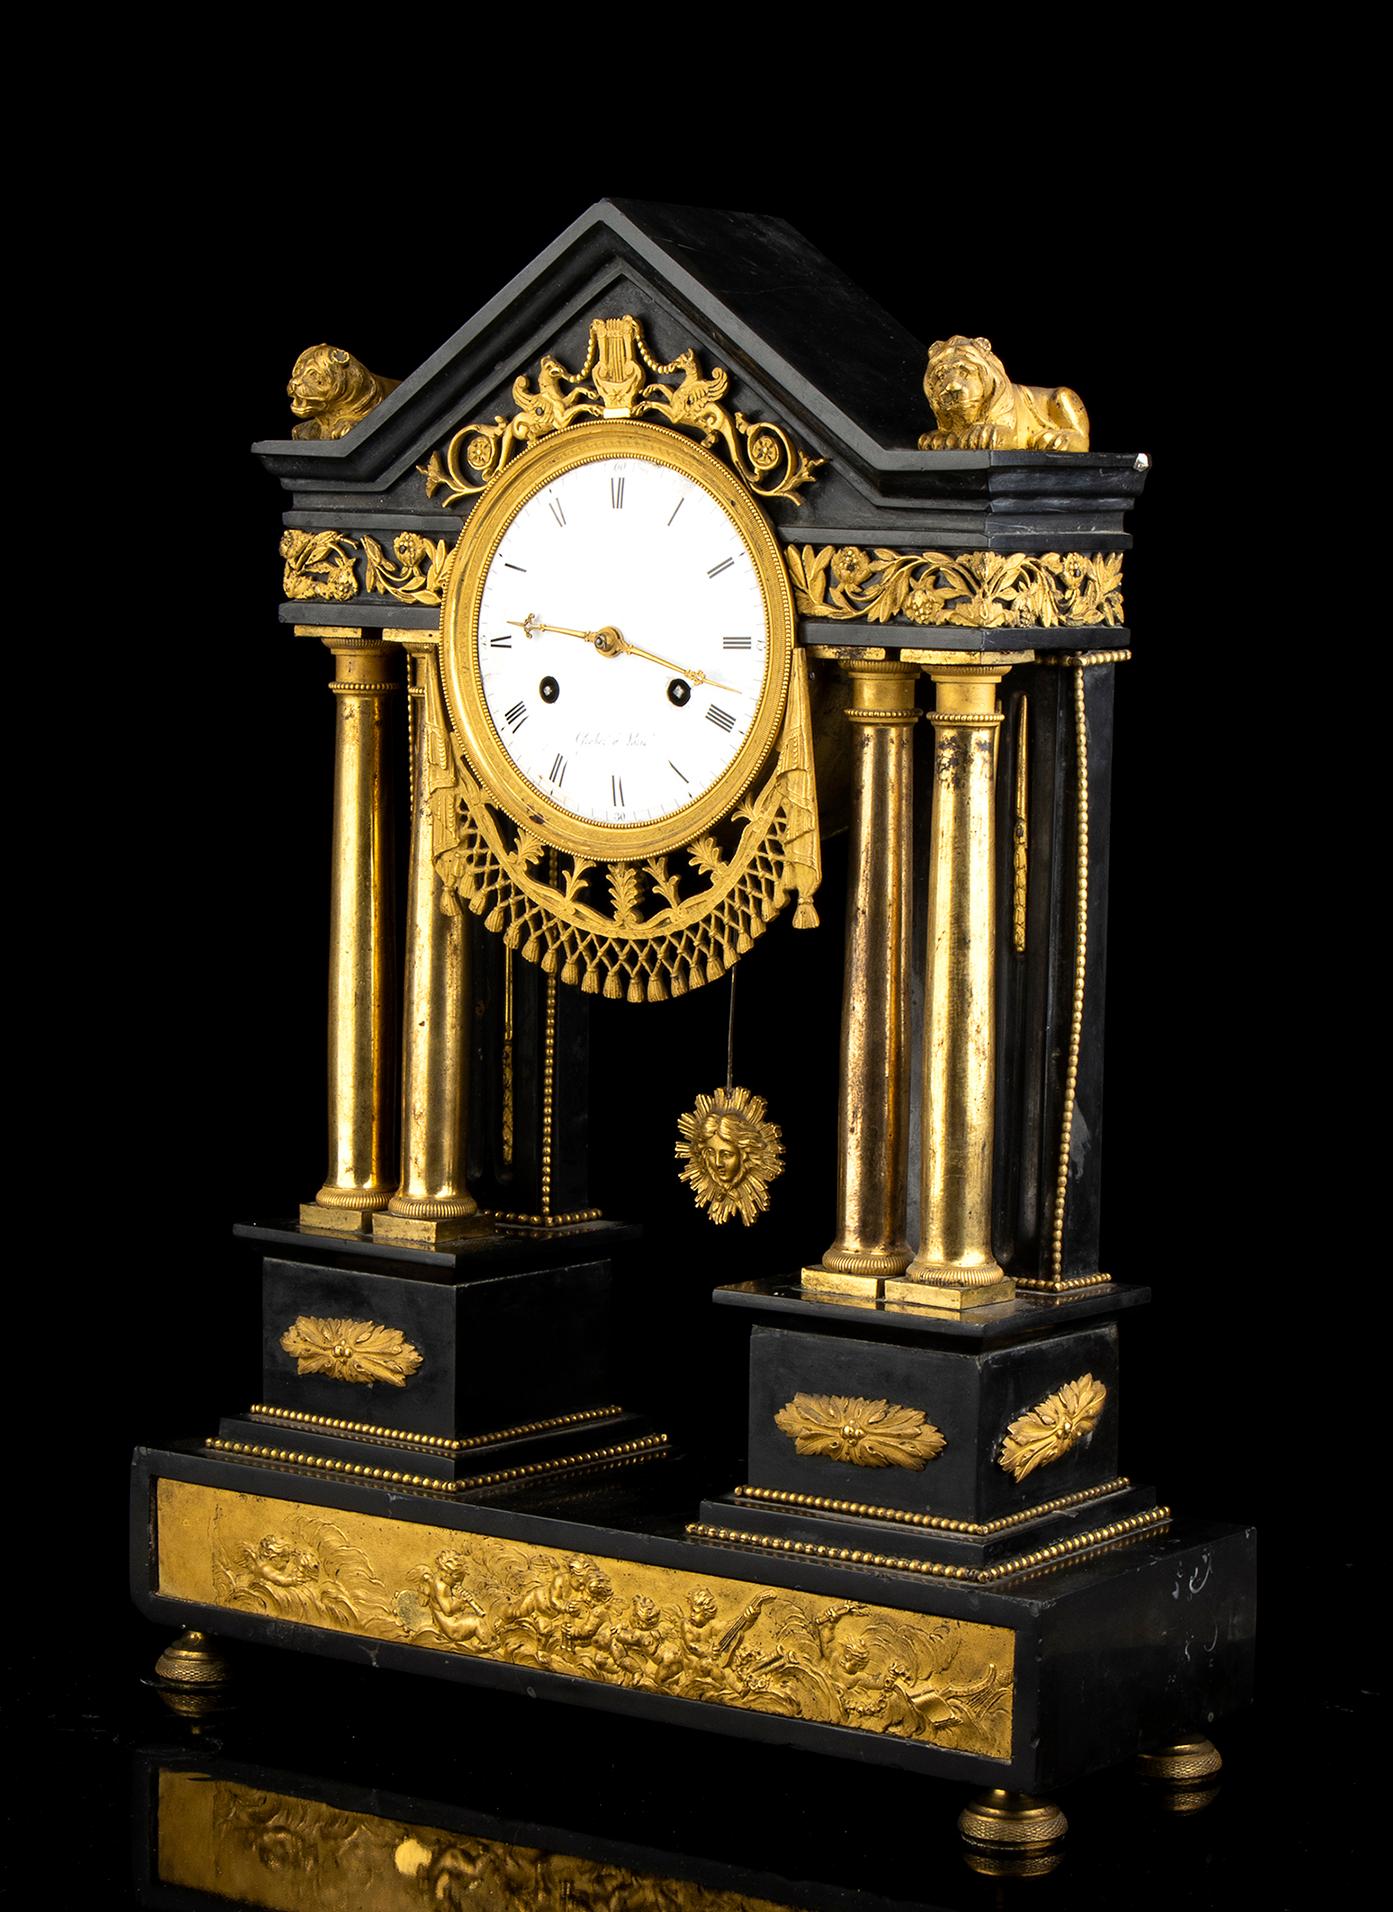 Bronze and marble mantle clock - France, Paris 18th century, signed GREBER
Black marble temple case with gilt bronze lions. Circular dial with Roman numerals signed 